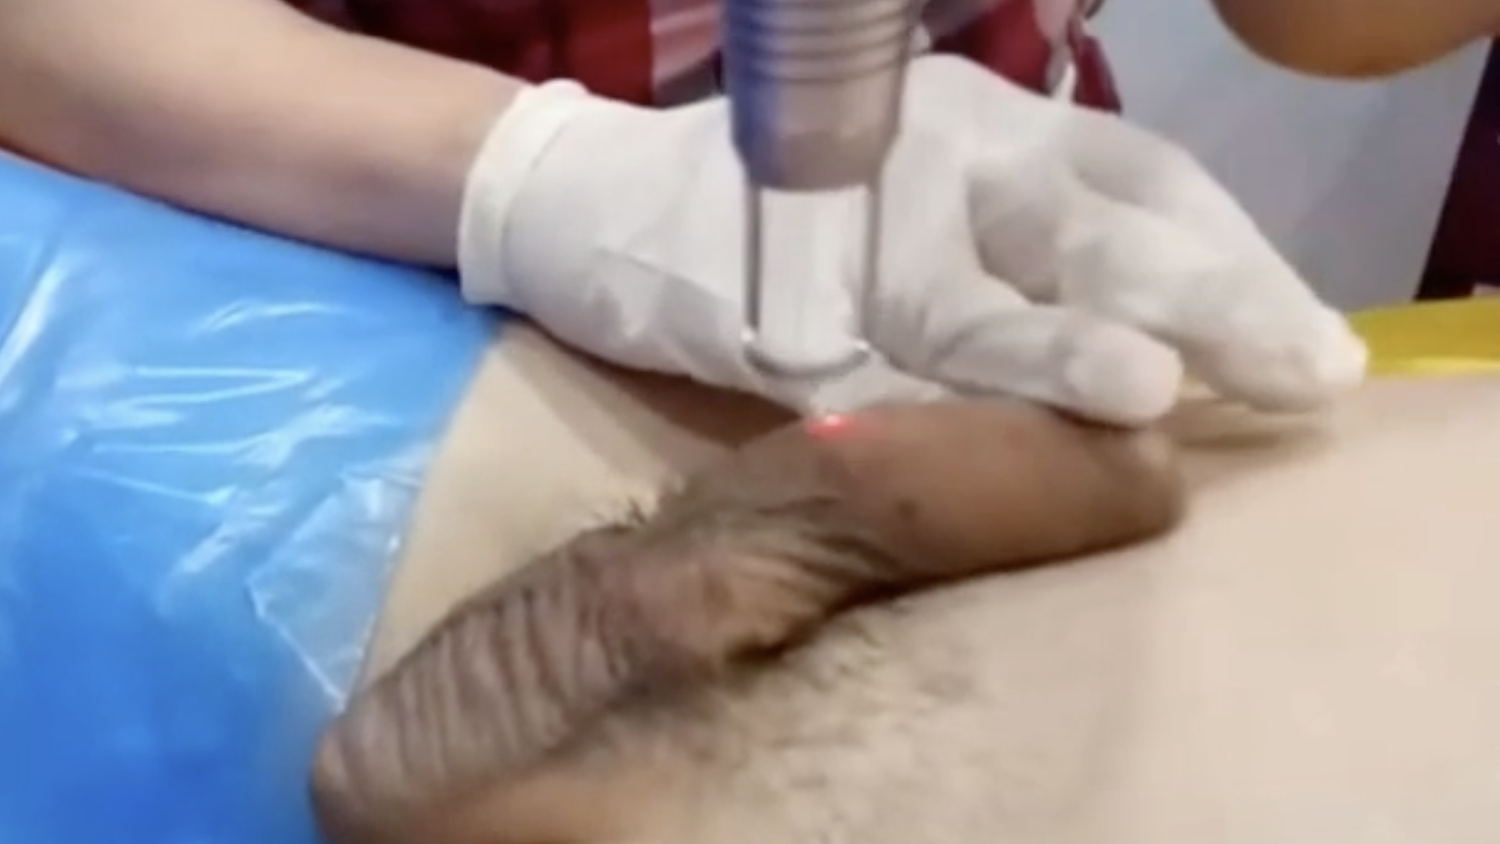 The laser treatment used for penis lightening is known to be very safe and ...